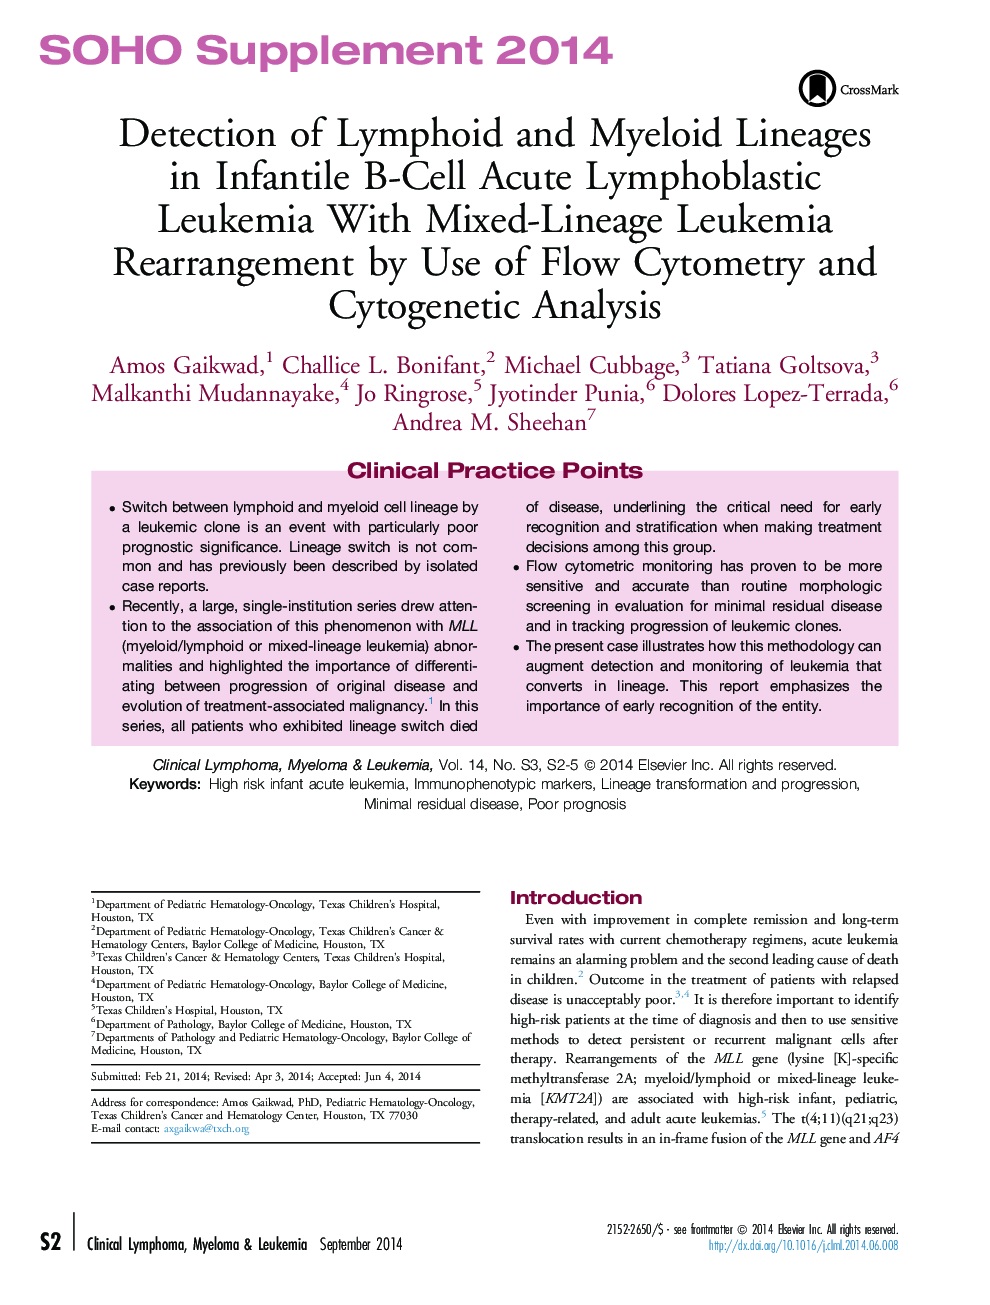 Detection of Lymphoid and Myeloid Lineages inÂ Infantile B-Cell Acute Lymphoblastic LeukemiaÂ With Mixed-Lineage Leukemia Rearrangement by Use of Flow Cytometry and Cytogenetic Analysis